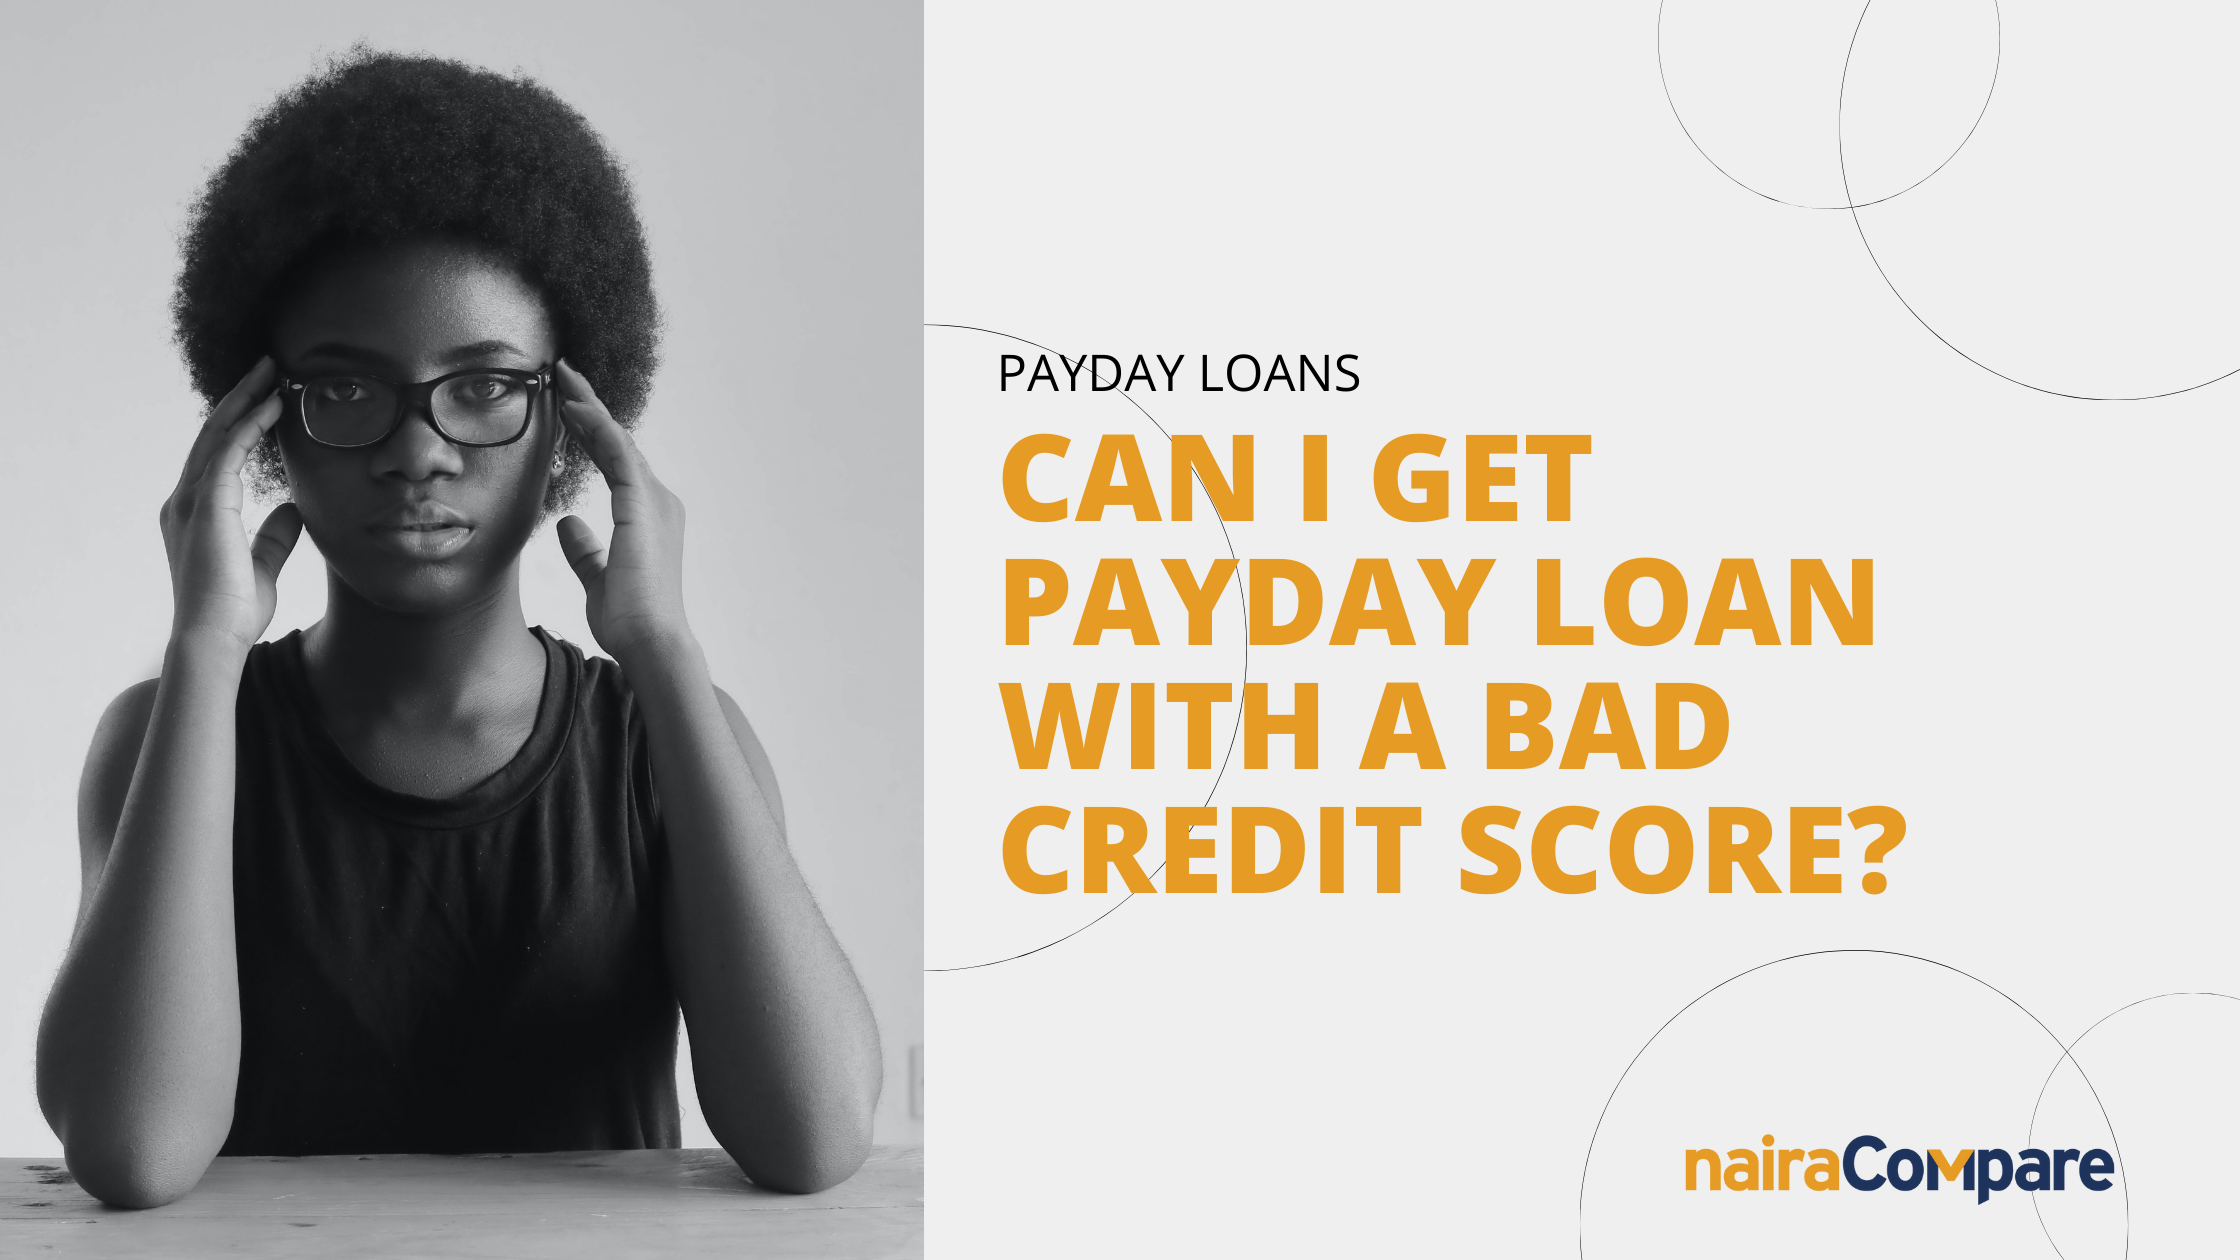 Can I Get Payday Loan with a Bad Credit Score?